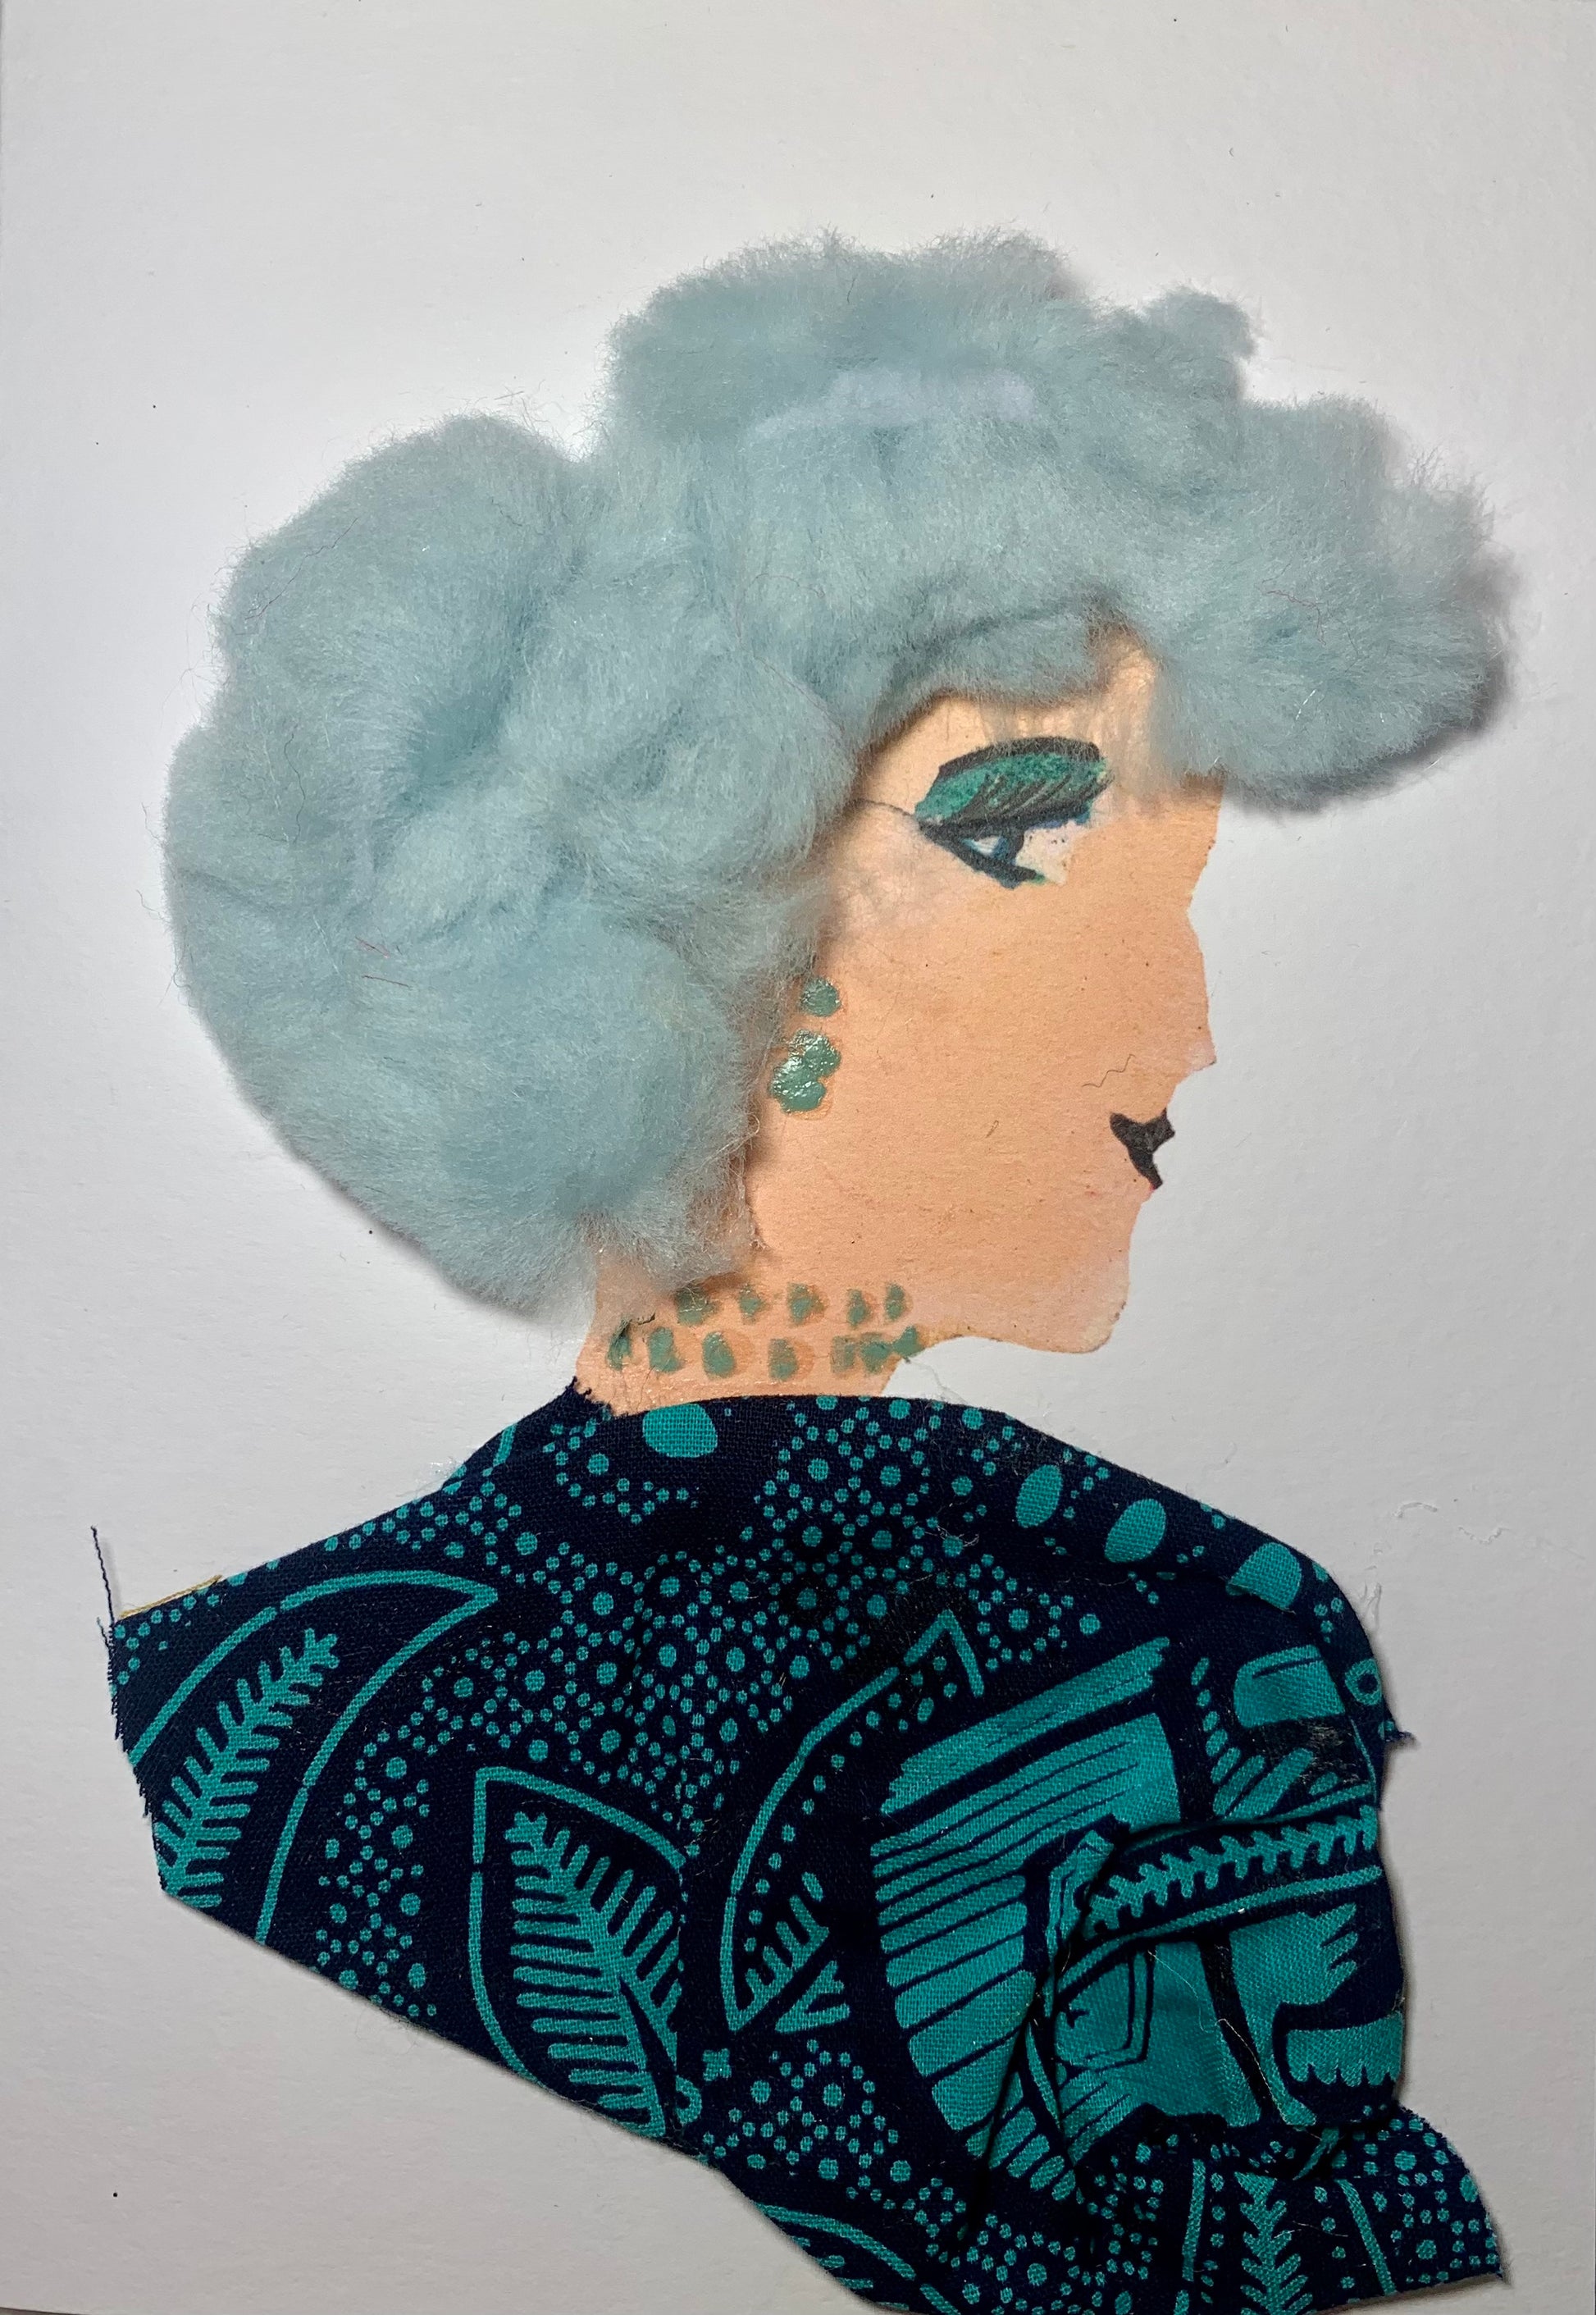 This card is of a woman given the name Freda. Freda wears a nature patterned blouse that is turquoise and black. Her jewellery is dainty and blue. He hair is blue and almost cotton like.  